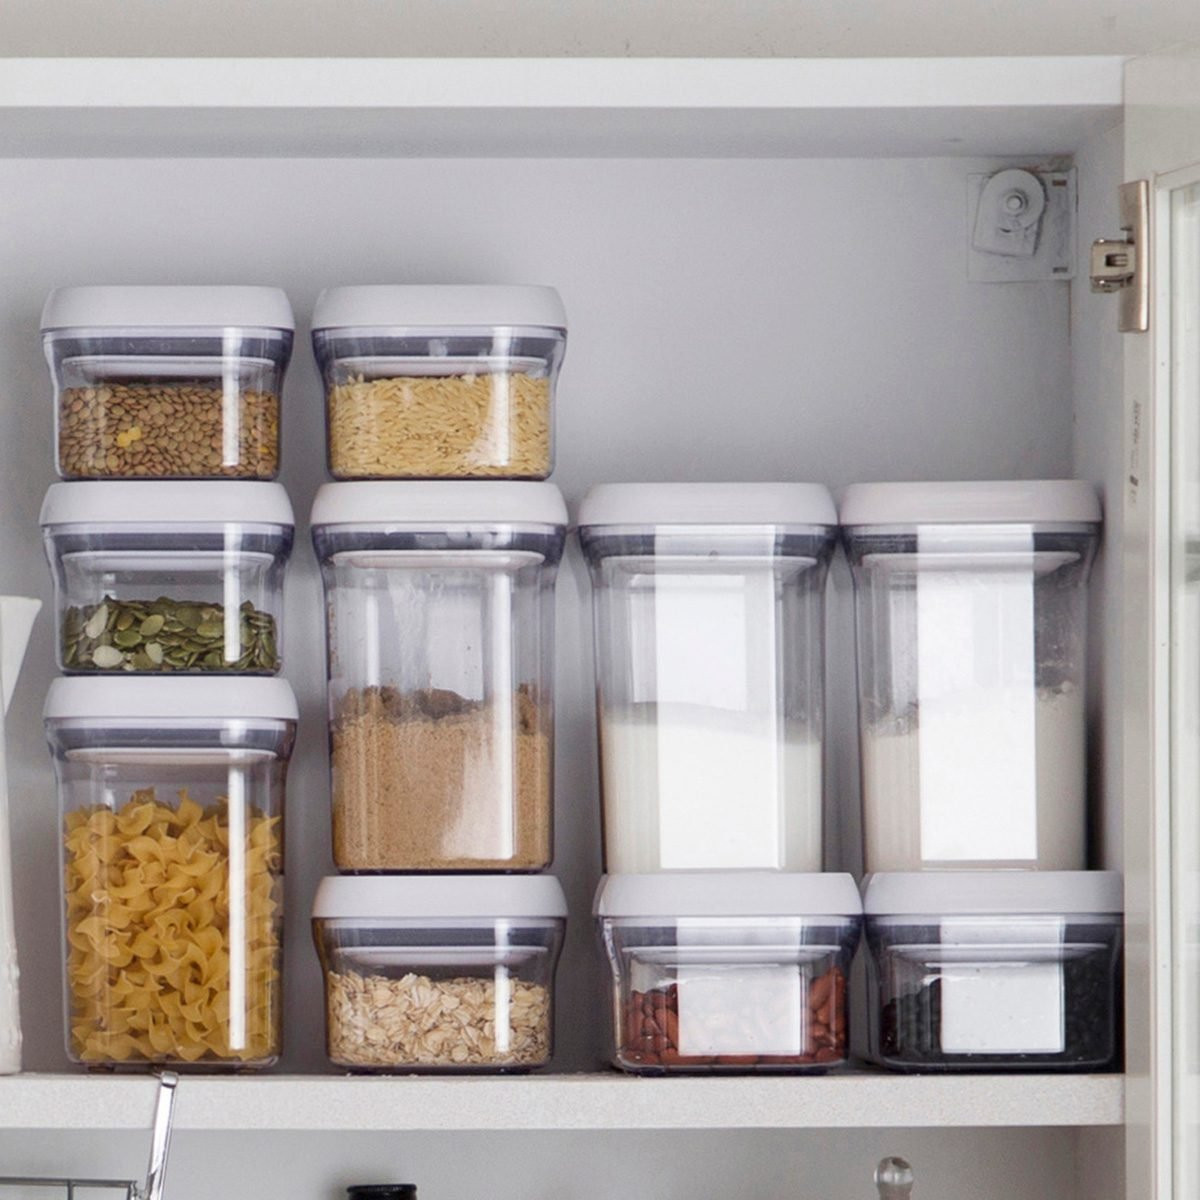 Storage Containers For Kitchen
 10 Kitchen Organizer Ideas That Will Change Your Life